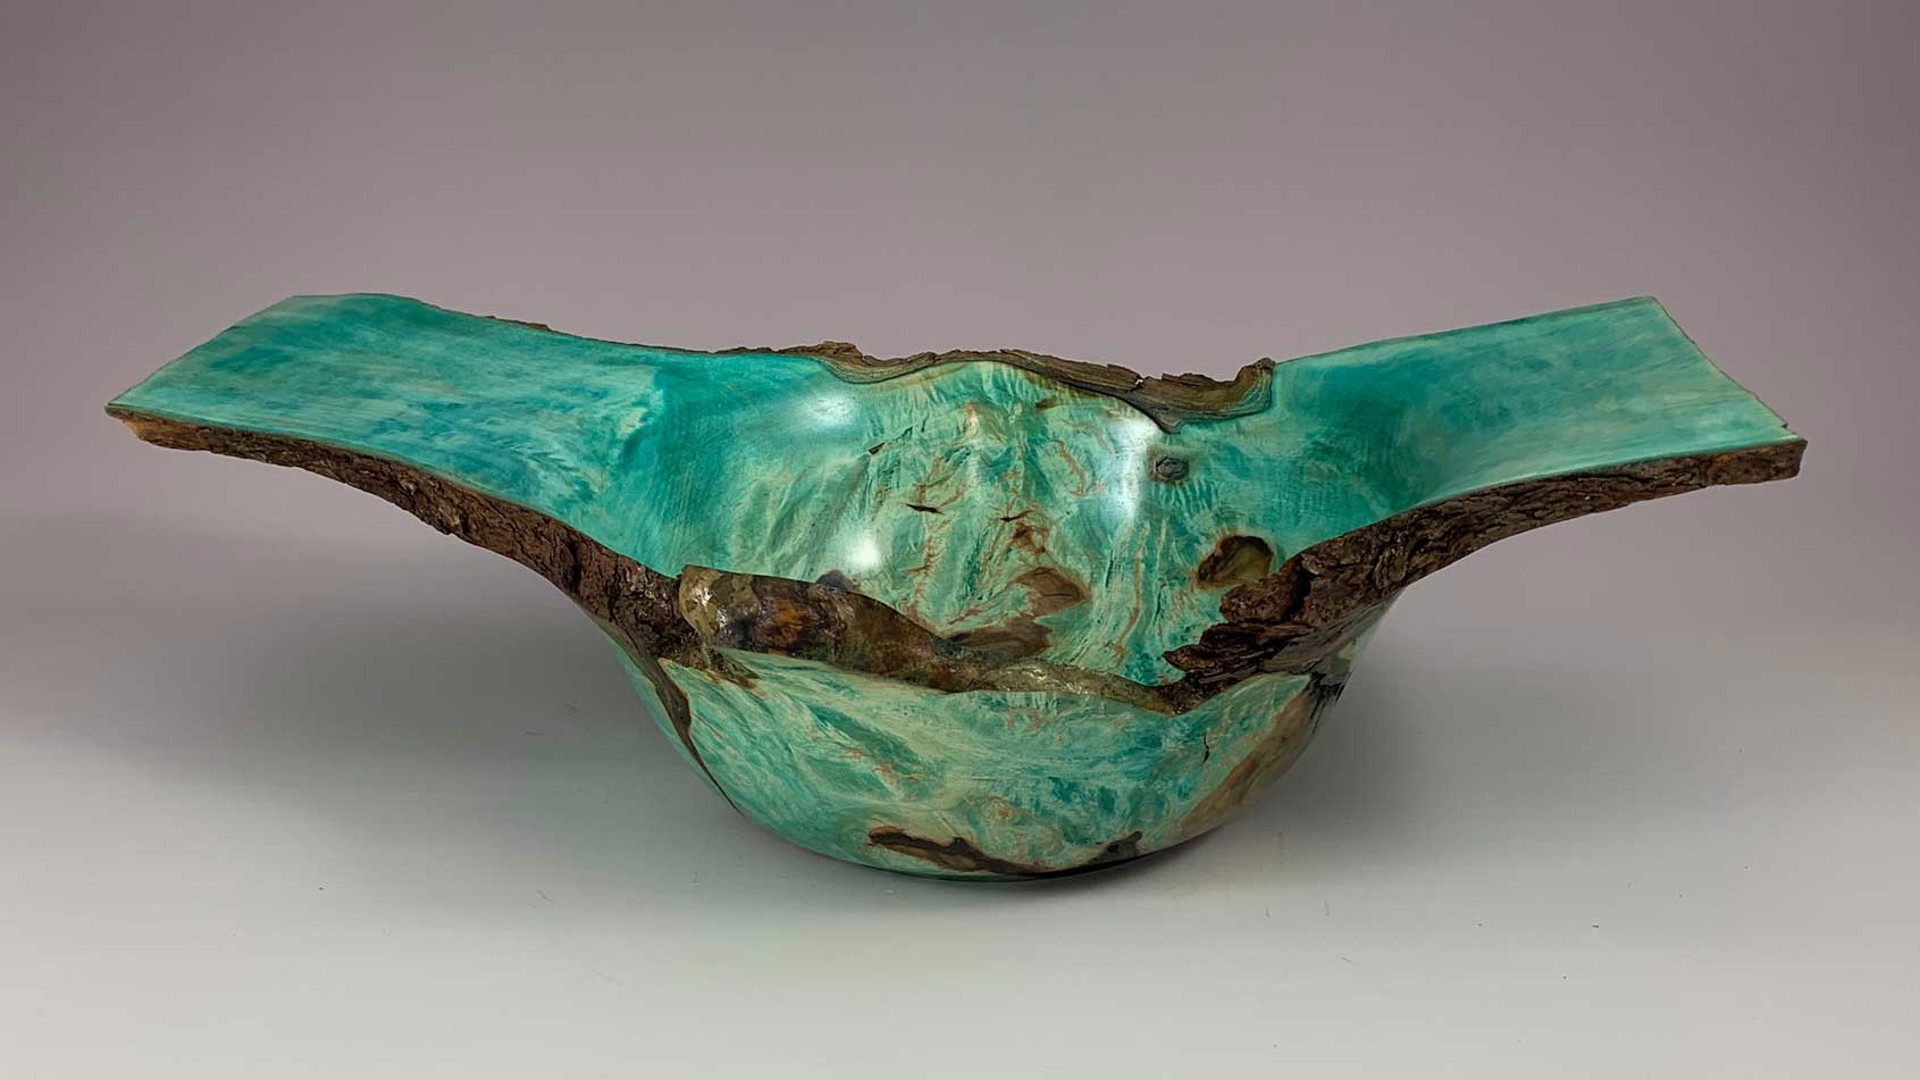 Maple Burl, Live Edge, Dyed Turquoise with Blue Epoxy #2 by Frank Didomizio